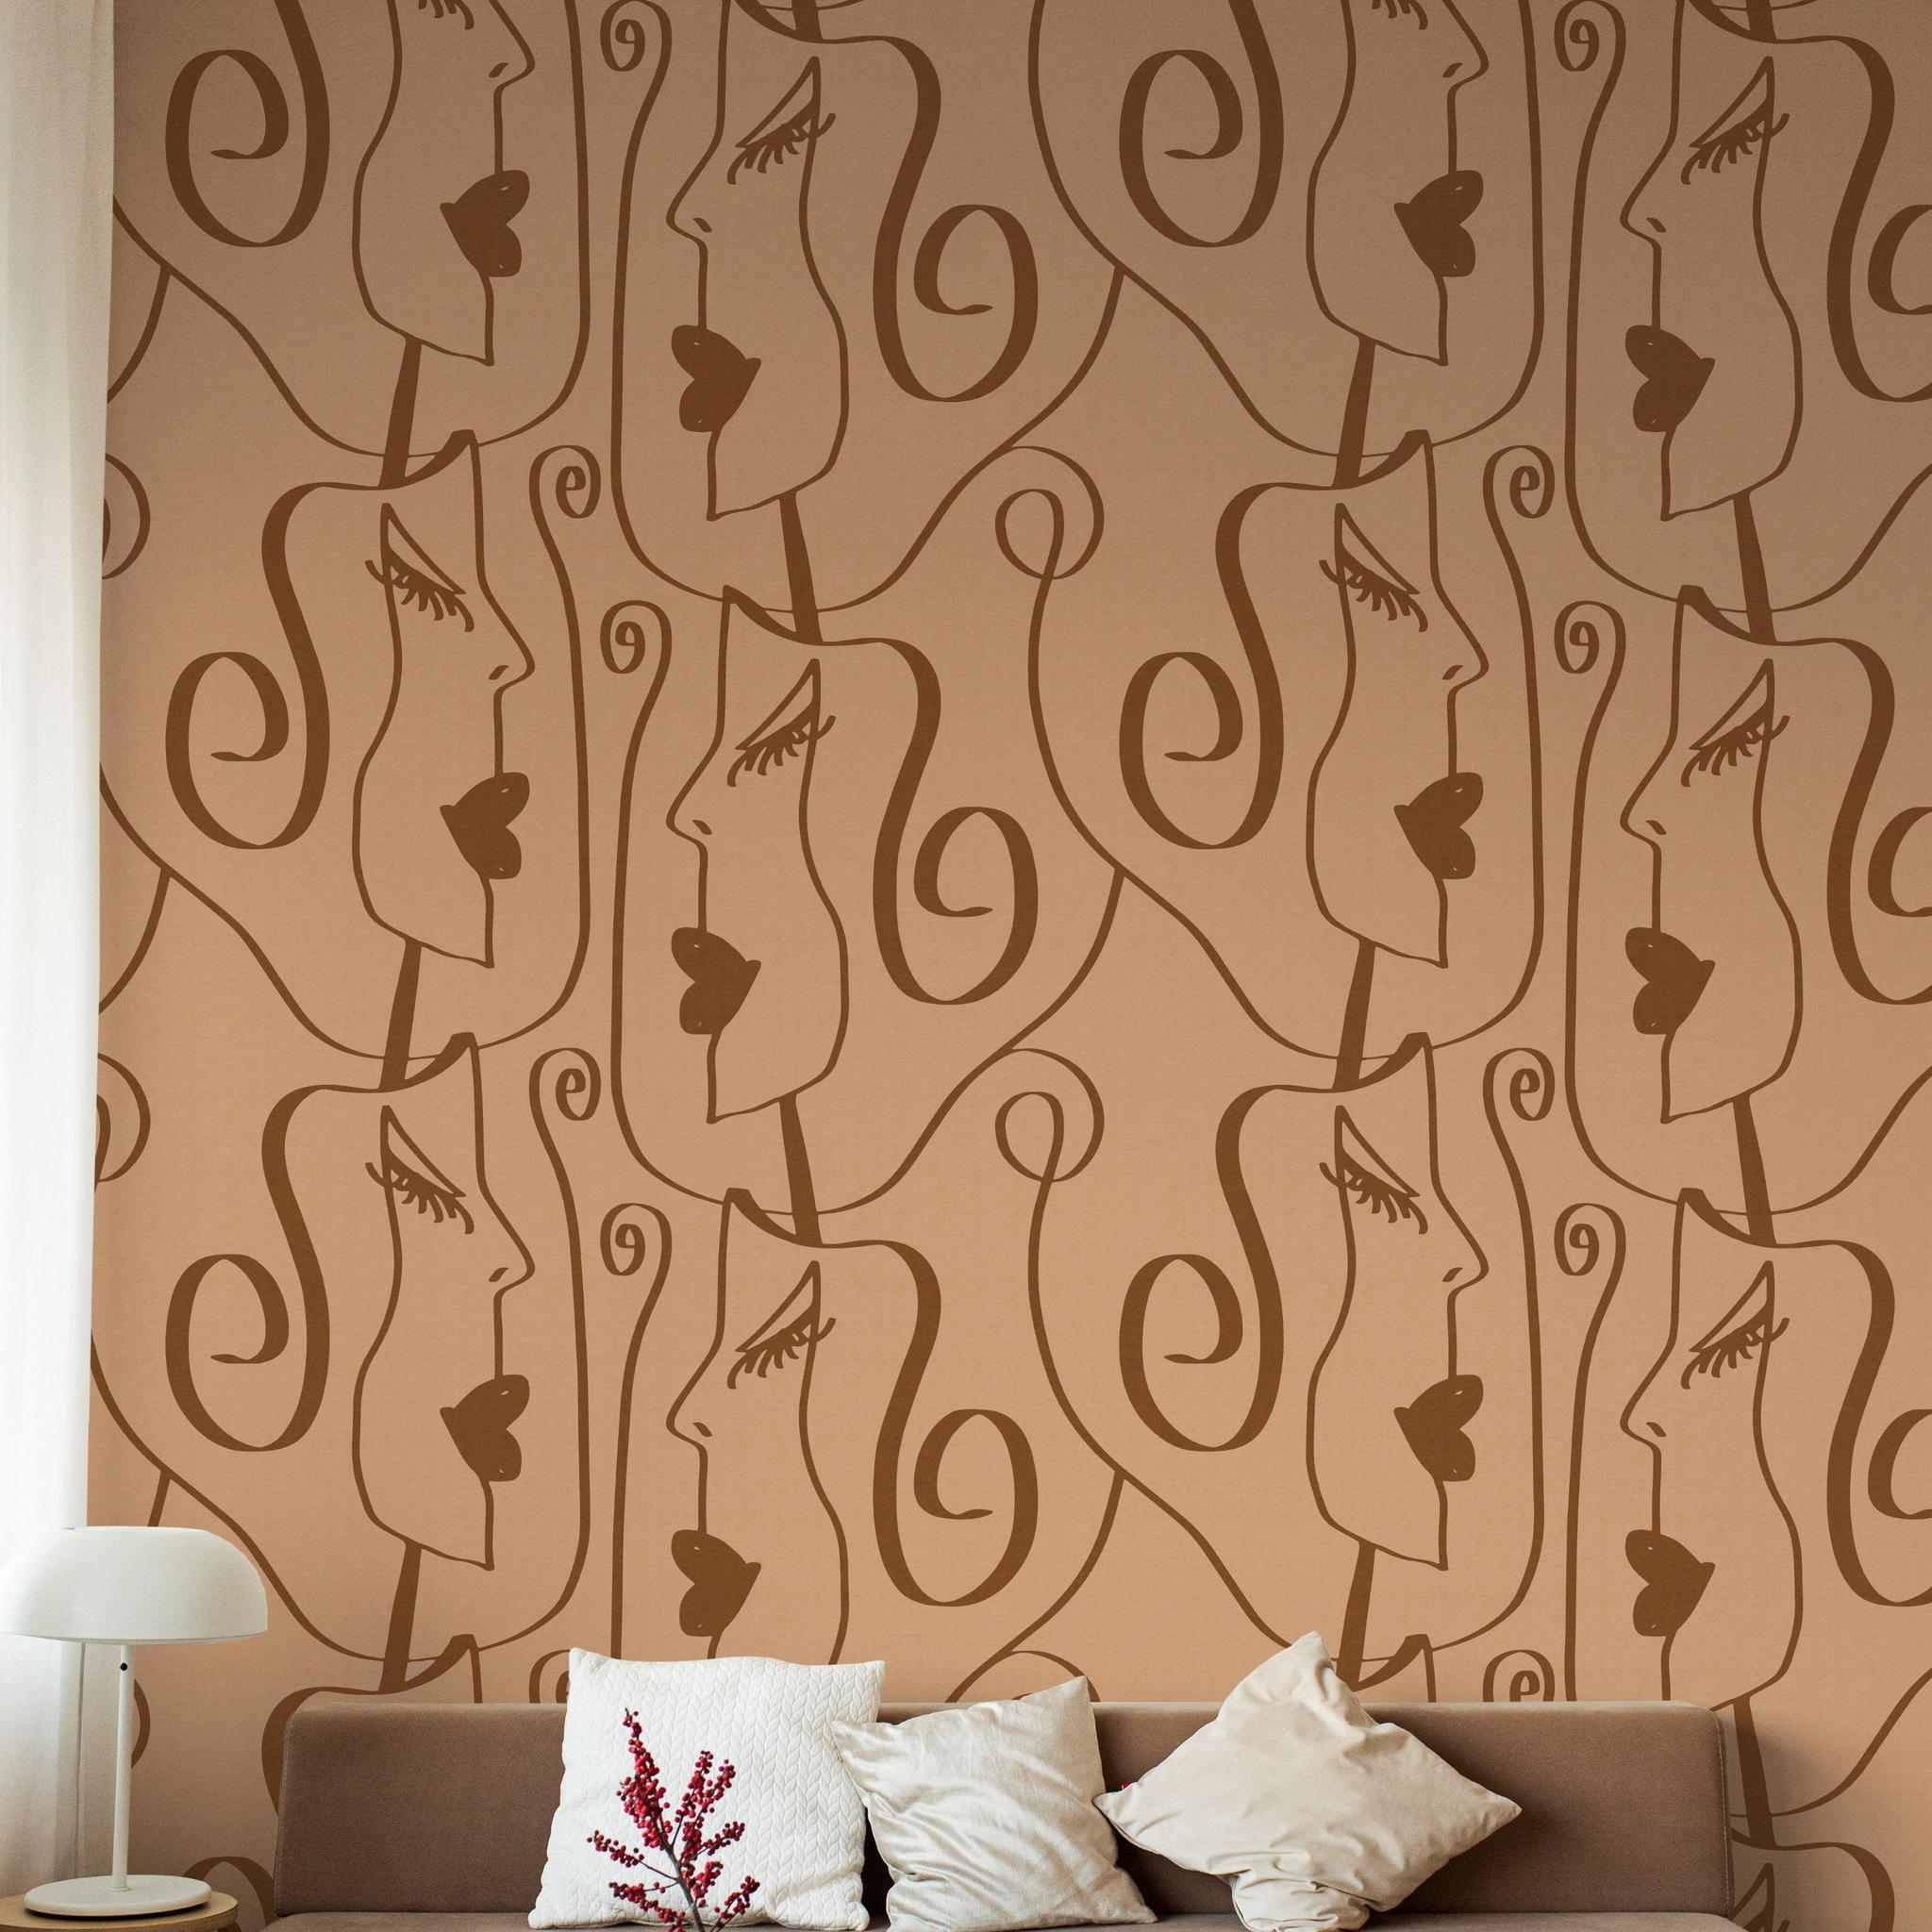 Tess Wallpaper by Wall Blush SG02 in a cozy living room with modern sofa and decor, highlighting stylish design.
